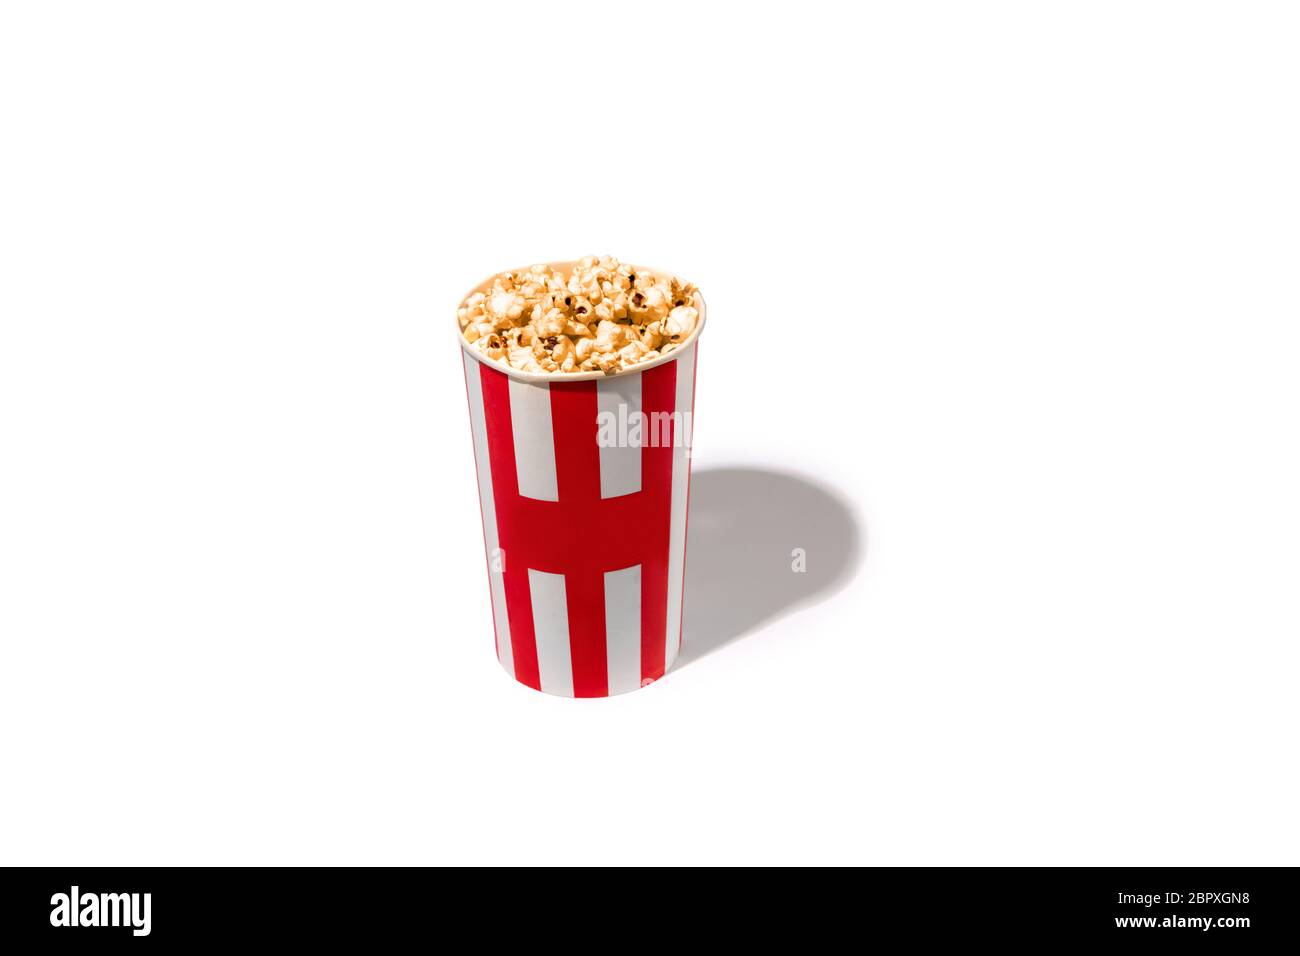 Striped white red bucket full of popcorn isolated on white studio background with copyspace for advertising. Entertainment, food, traditional snacks, time for cinema and having fun, tasty. Stock Photo